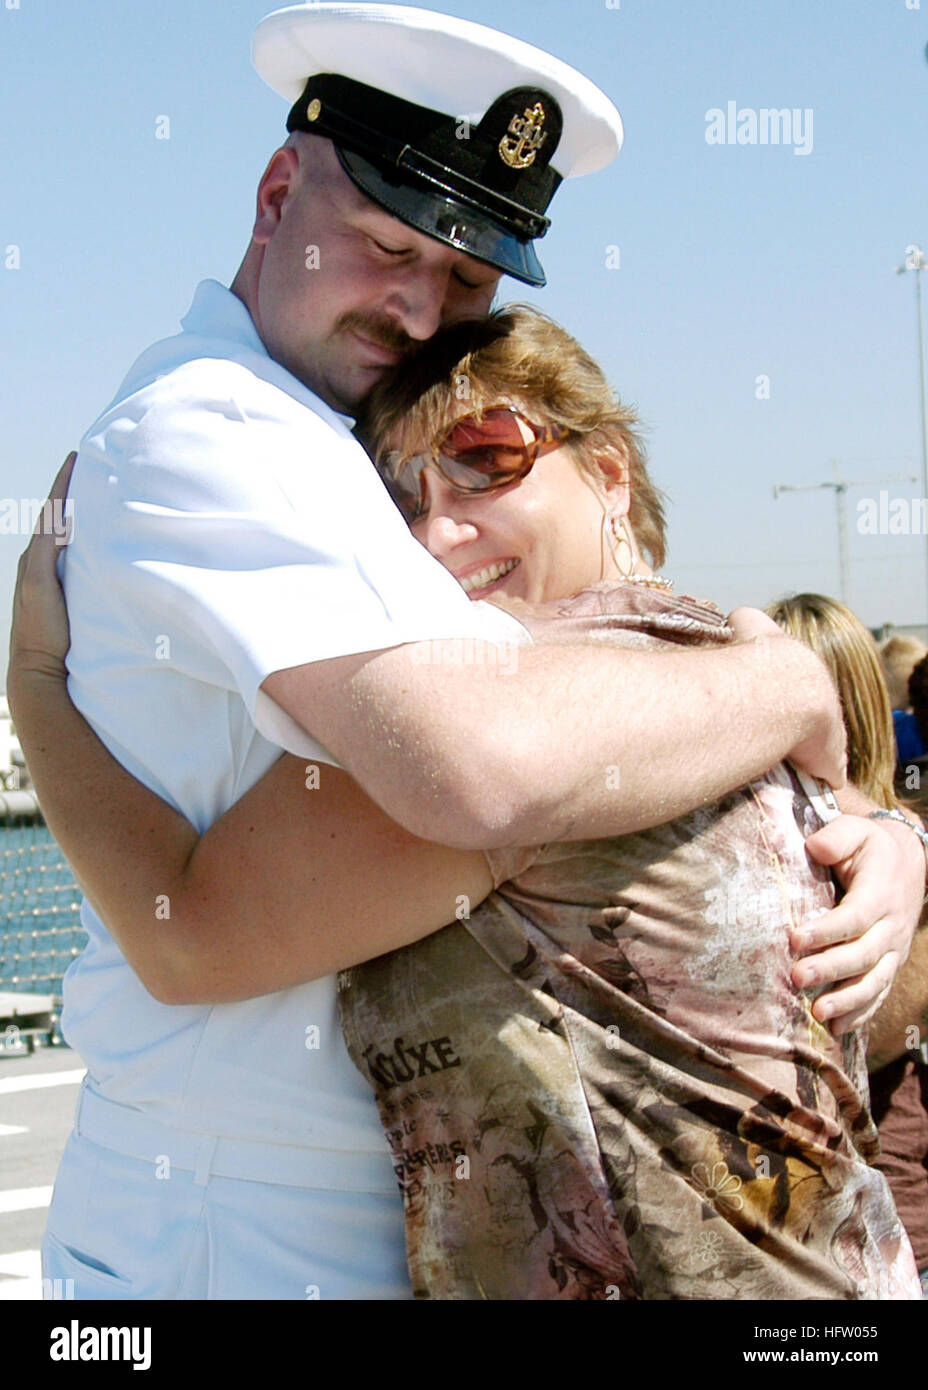 070910-N-5411L-141  SAN DIEGO (Sept. 10, 2007) - Chief Operations Specialist John Hershey, assigned to guided-missile frigate USS Gary (FFG 51), hugs his wife after returning from Yokosuka, Japan, following a hull swap with guided-missile cruiser USS McCampbell (DDG 85). Gary had been forward deployed in Japan for the past eight years, where she participated in a number of international relations visits to foreign ports. U.S. Navy photo by Mass Communication Specialist 1st Class Paula M. Ludwick (RELEASED) US Navy 070910-N-5411L-141 Chief Operations Specialist John Hershey, assigned to guided- Stock Photo